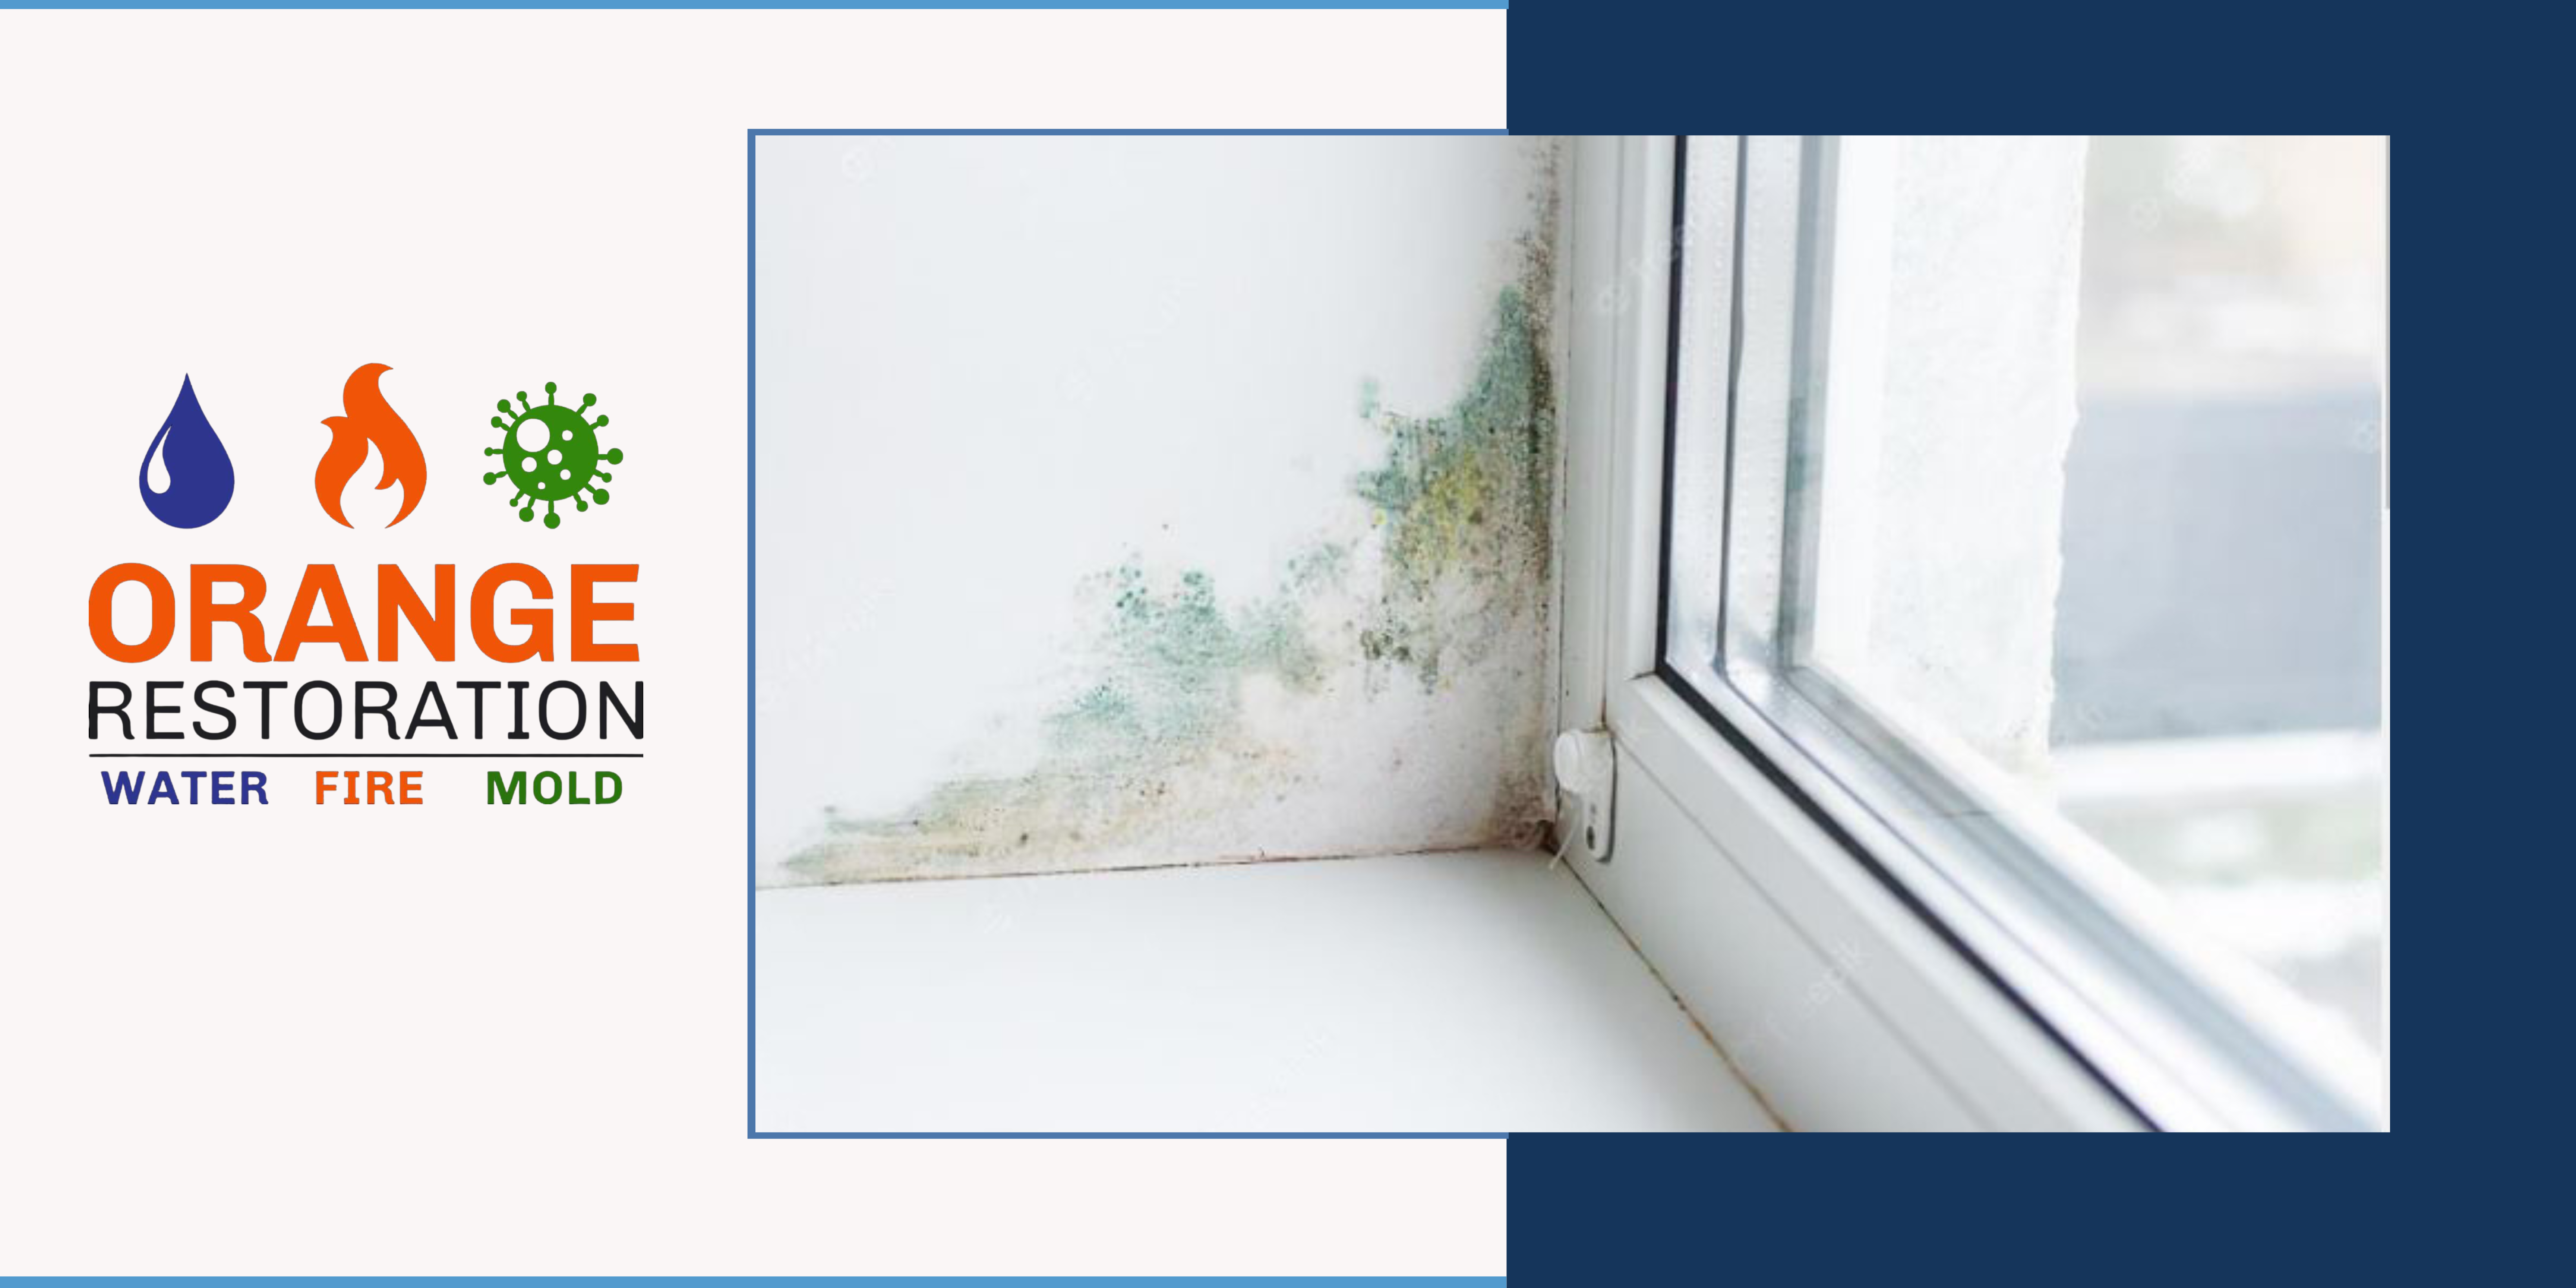 When Mold Remediation is needed, call an expert! this image shows mold in the edge of a window panel and the wall.